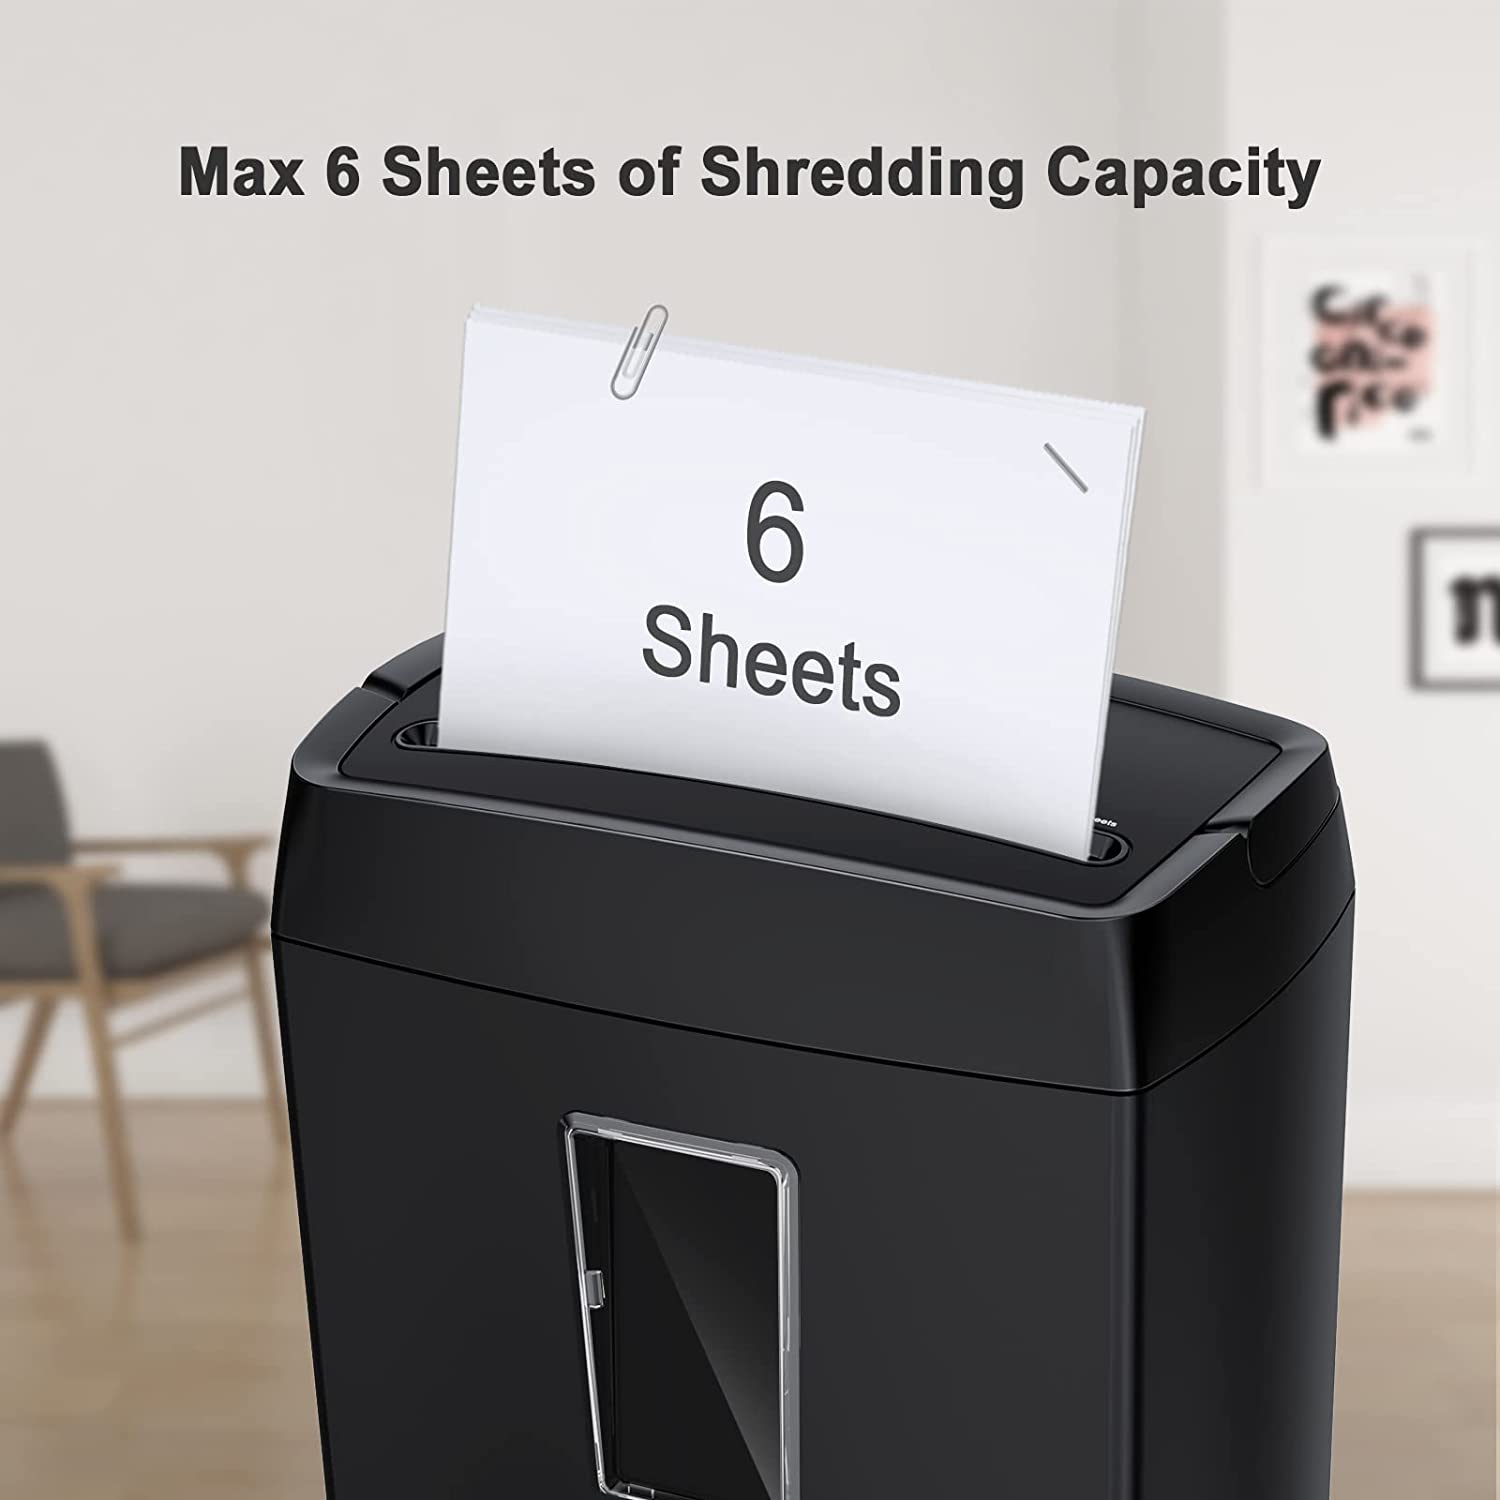 Paper Shredder for Home & Office Use, 6-Sheet Cross-Cut Paper Shredder, 4-Minute Continuous Running Time, 3.4 Gallons Wastebasket, Black 